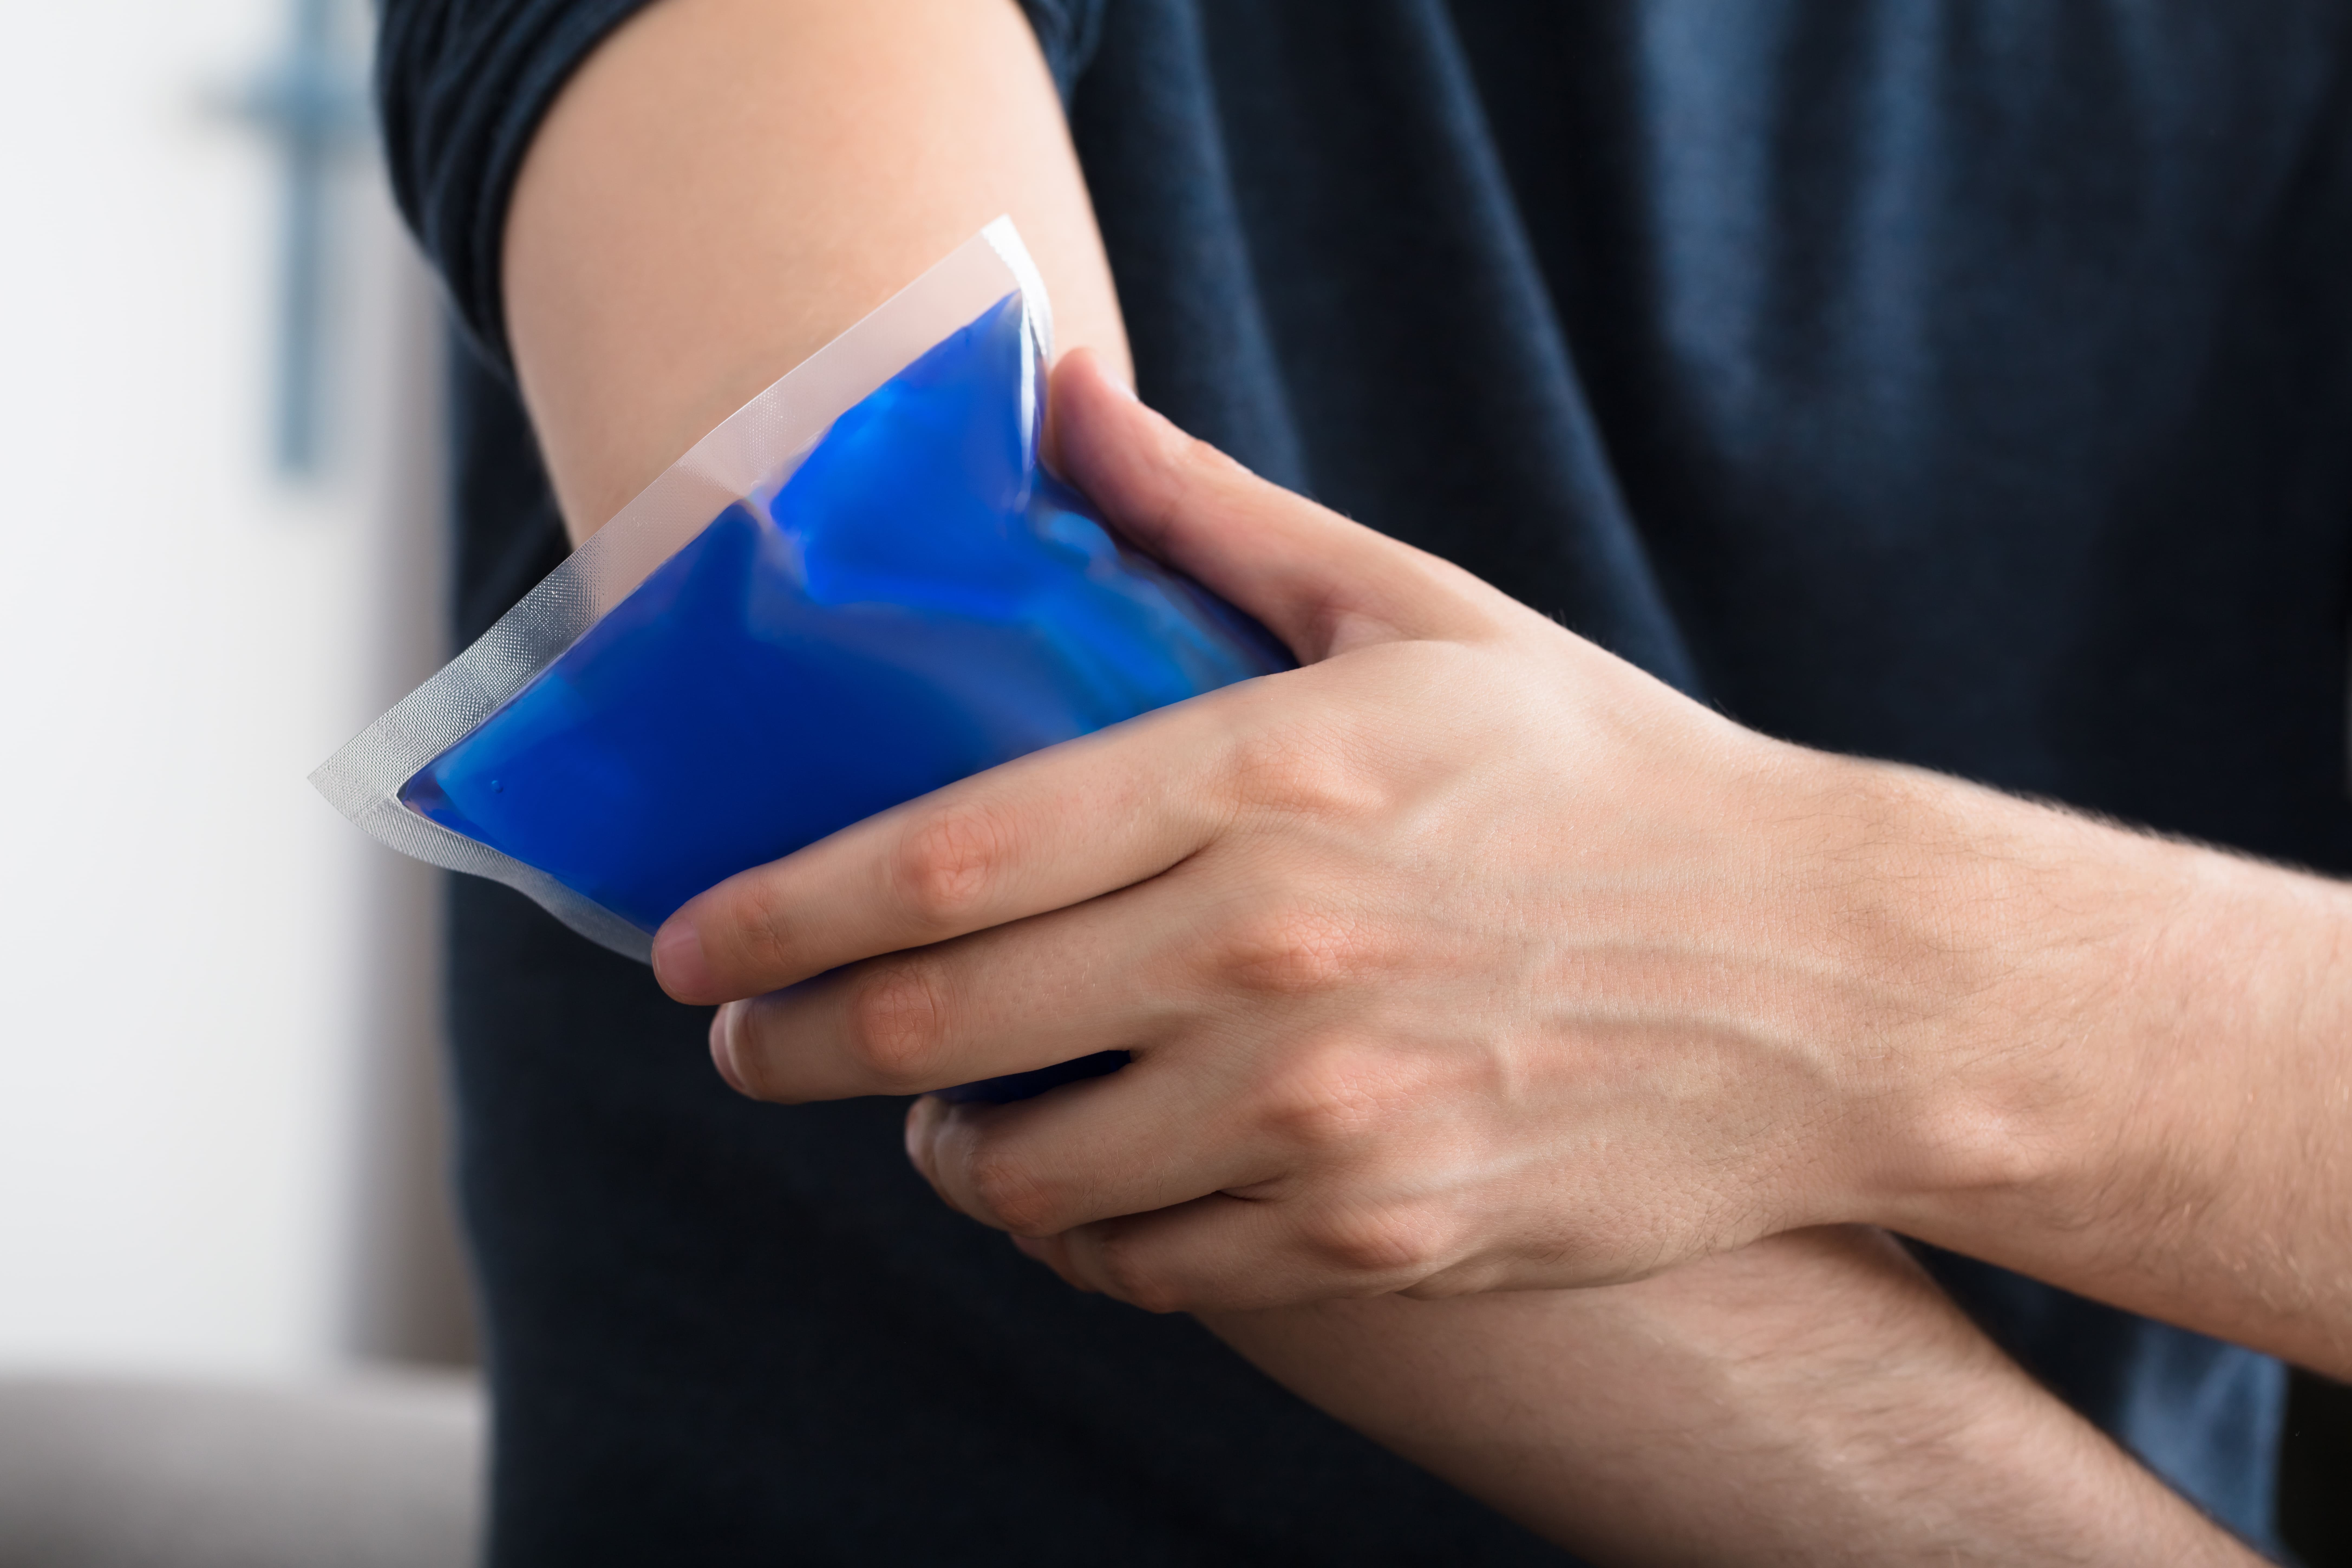 Man applying ice pack to his arm.